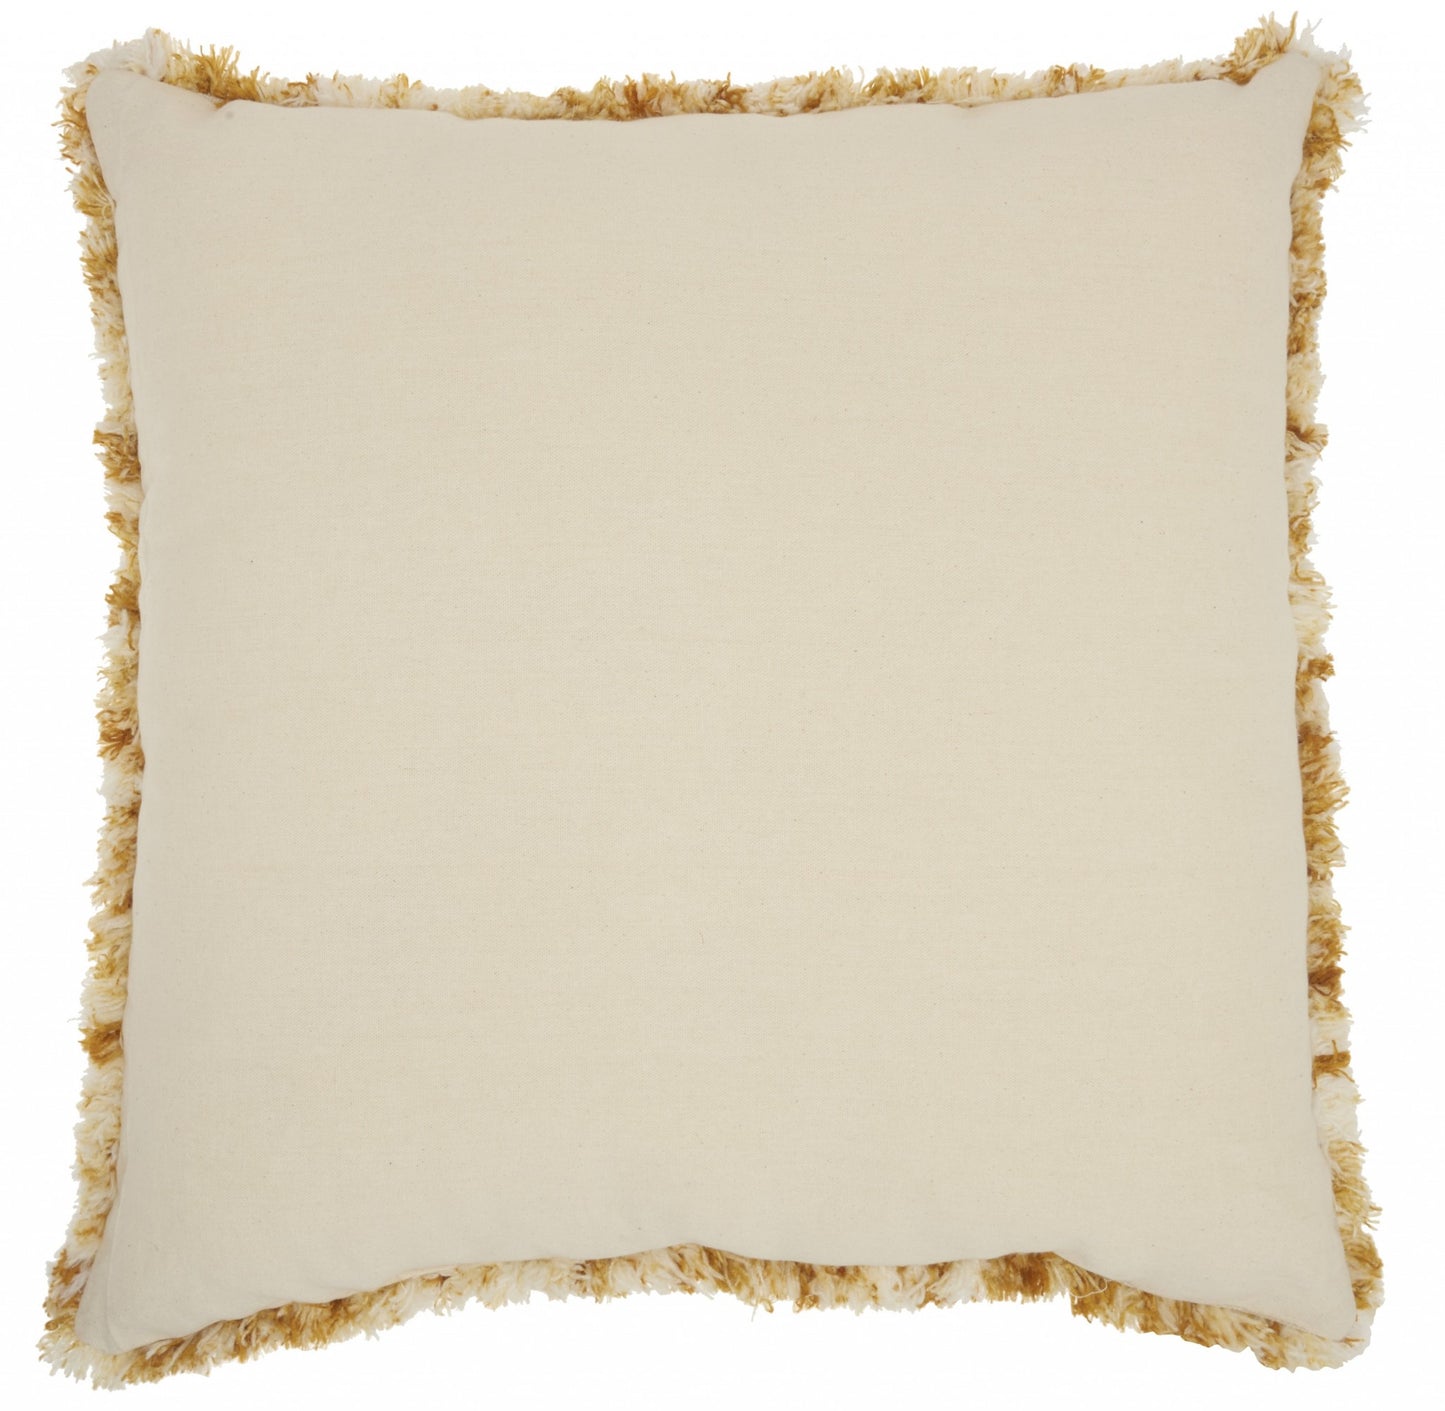 Soft Shaggy Yellow And White Spotted Throw Pillow